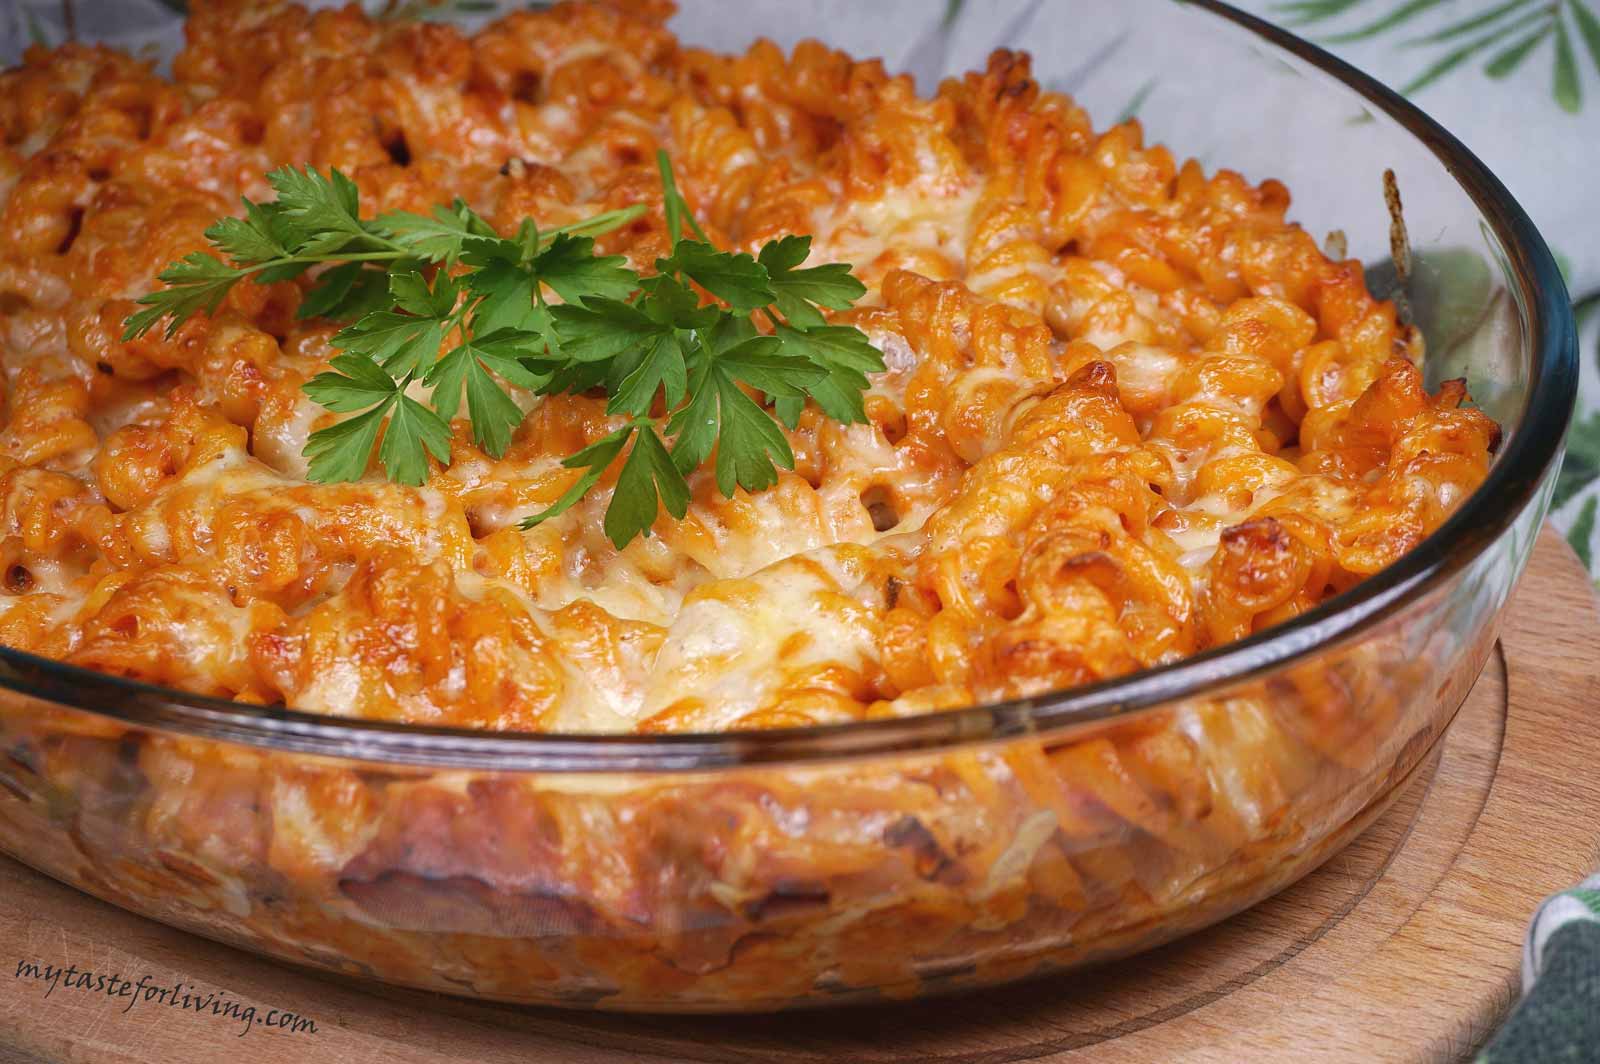 Easy cheese and tomato pasta bake when you want something tasty, delicious and appetizingy to eat but can’t have a lot of time in the kitchen.